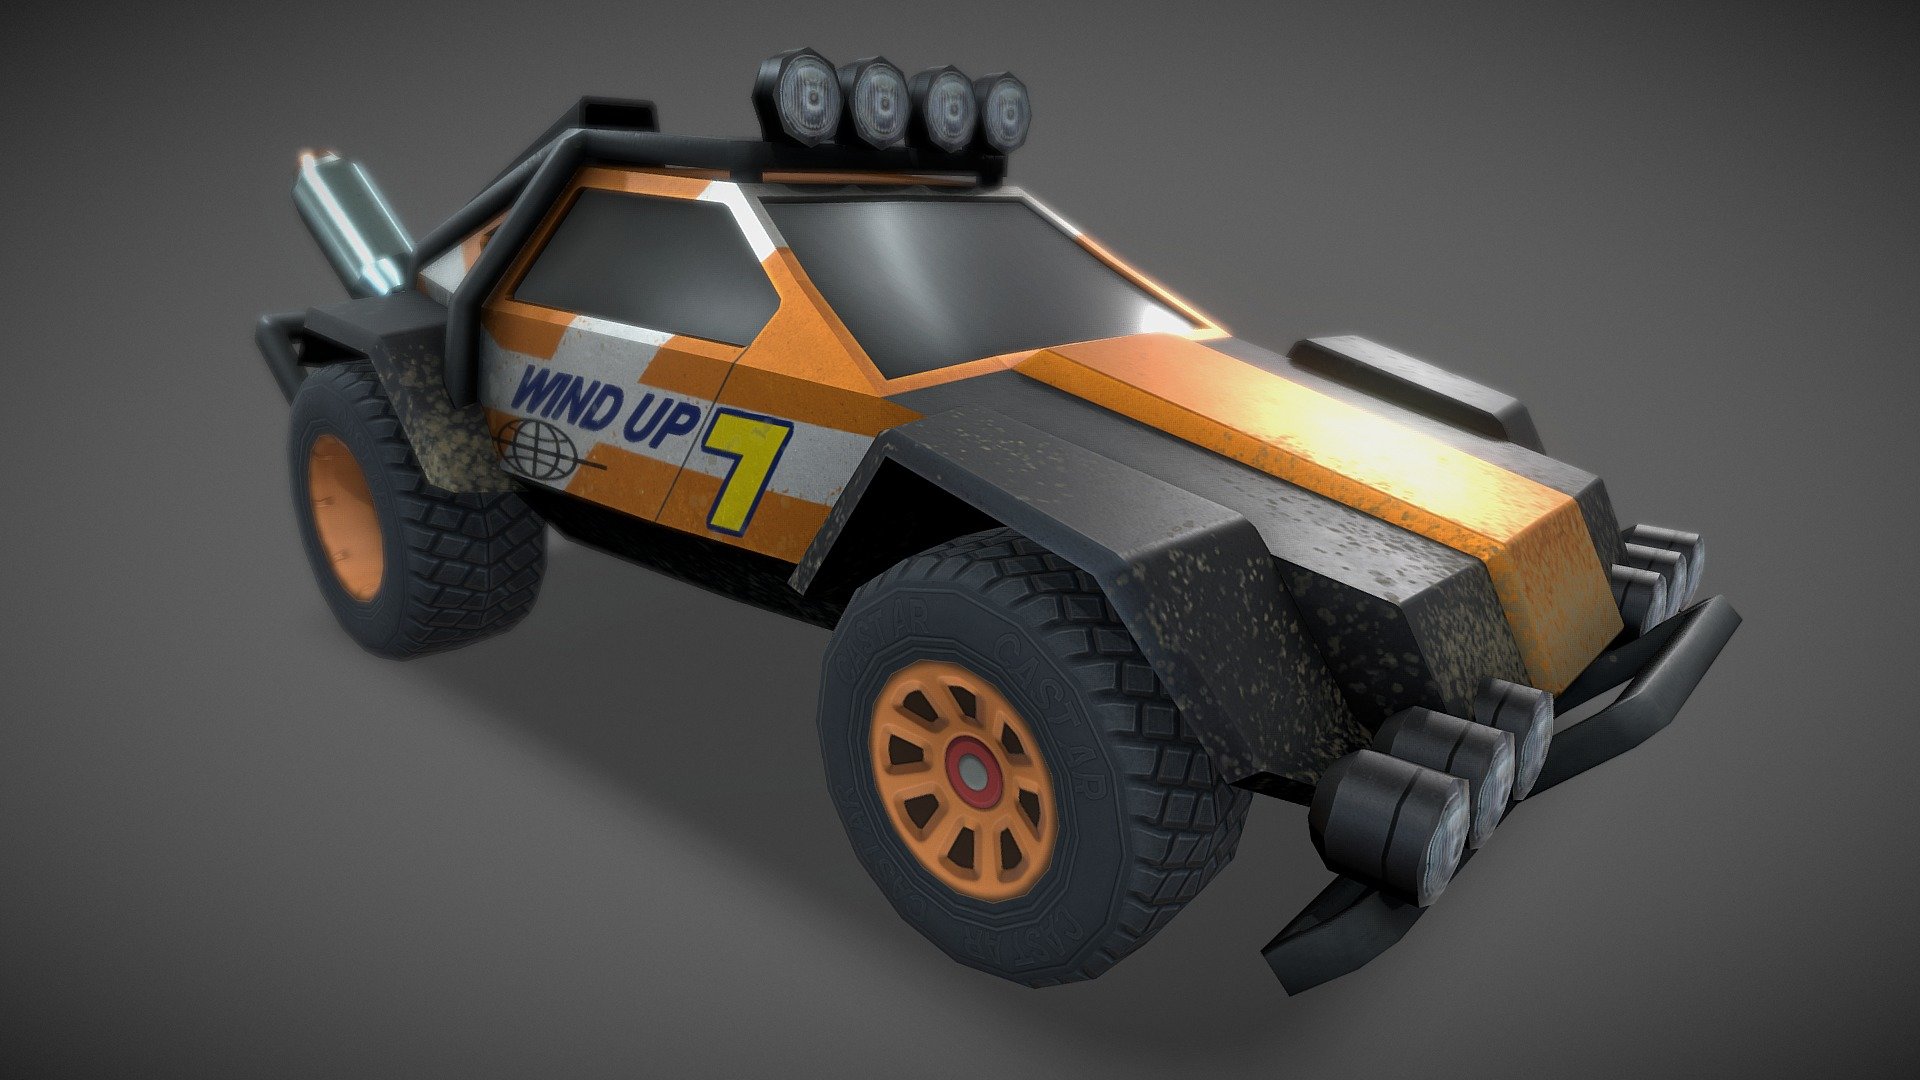 I created this vehicle for a racing game. It is based off of sandrail type vehicles. We were developing it for the CastAR hardware. CastAR was going to be an augmented reality system. The company had some ambitious goals. I was really hoping we could have gotten this game out there. It was in beta and close to release. It was looking and running great 3d model